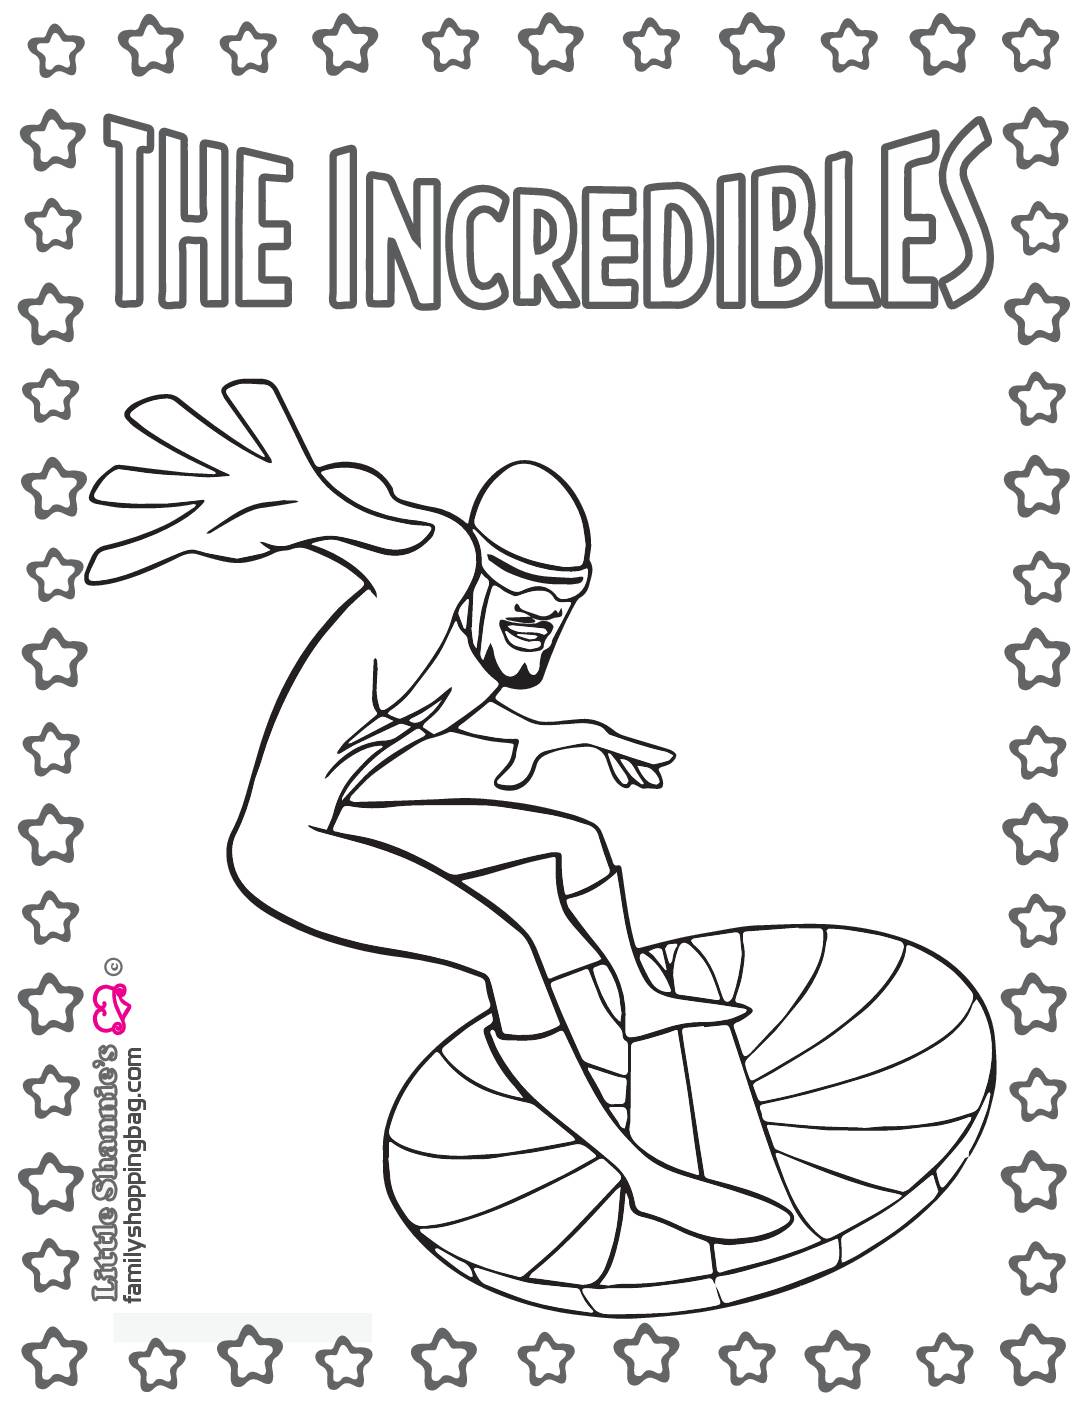 Coloring Page 9 Incredibles Coloring Pages